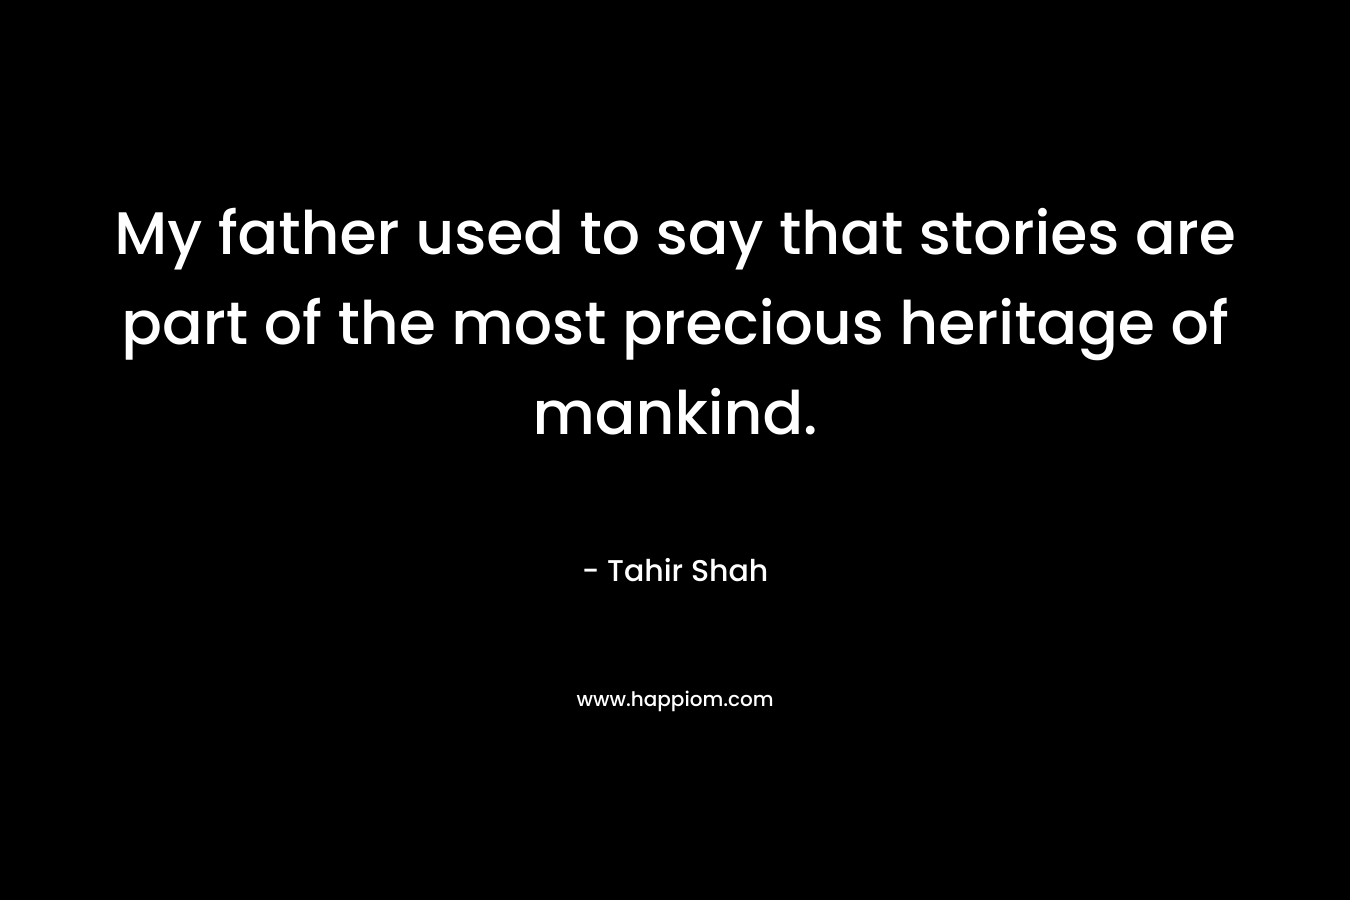 My father used to say that stories are part of the most precious heritage of mankind.